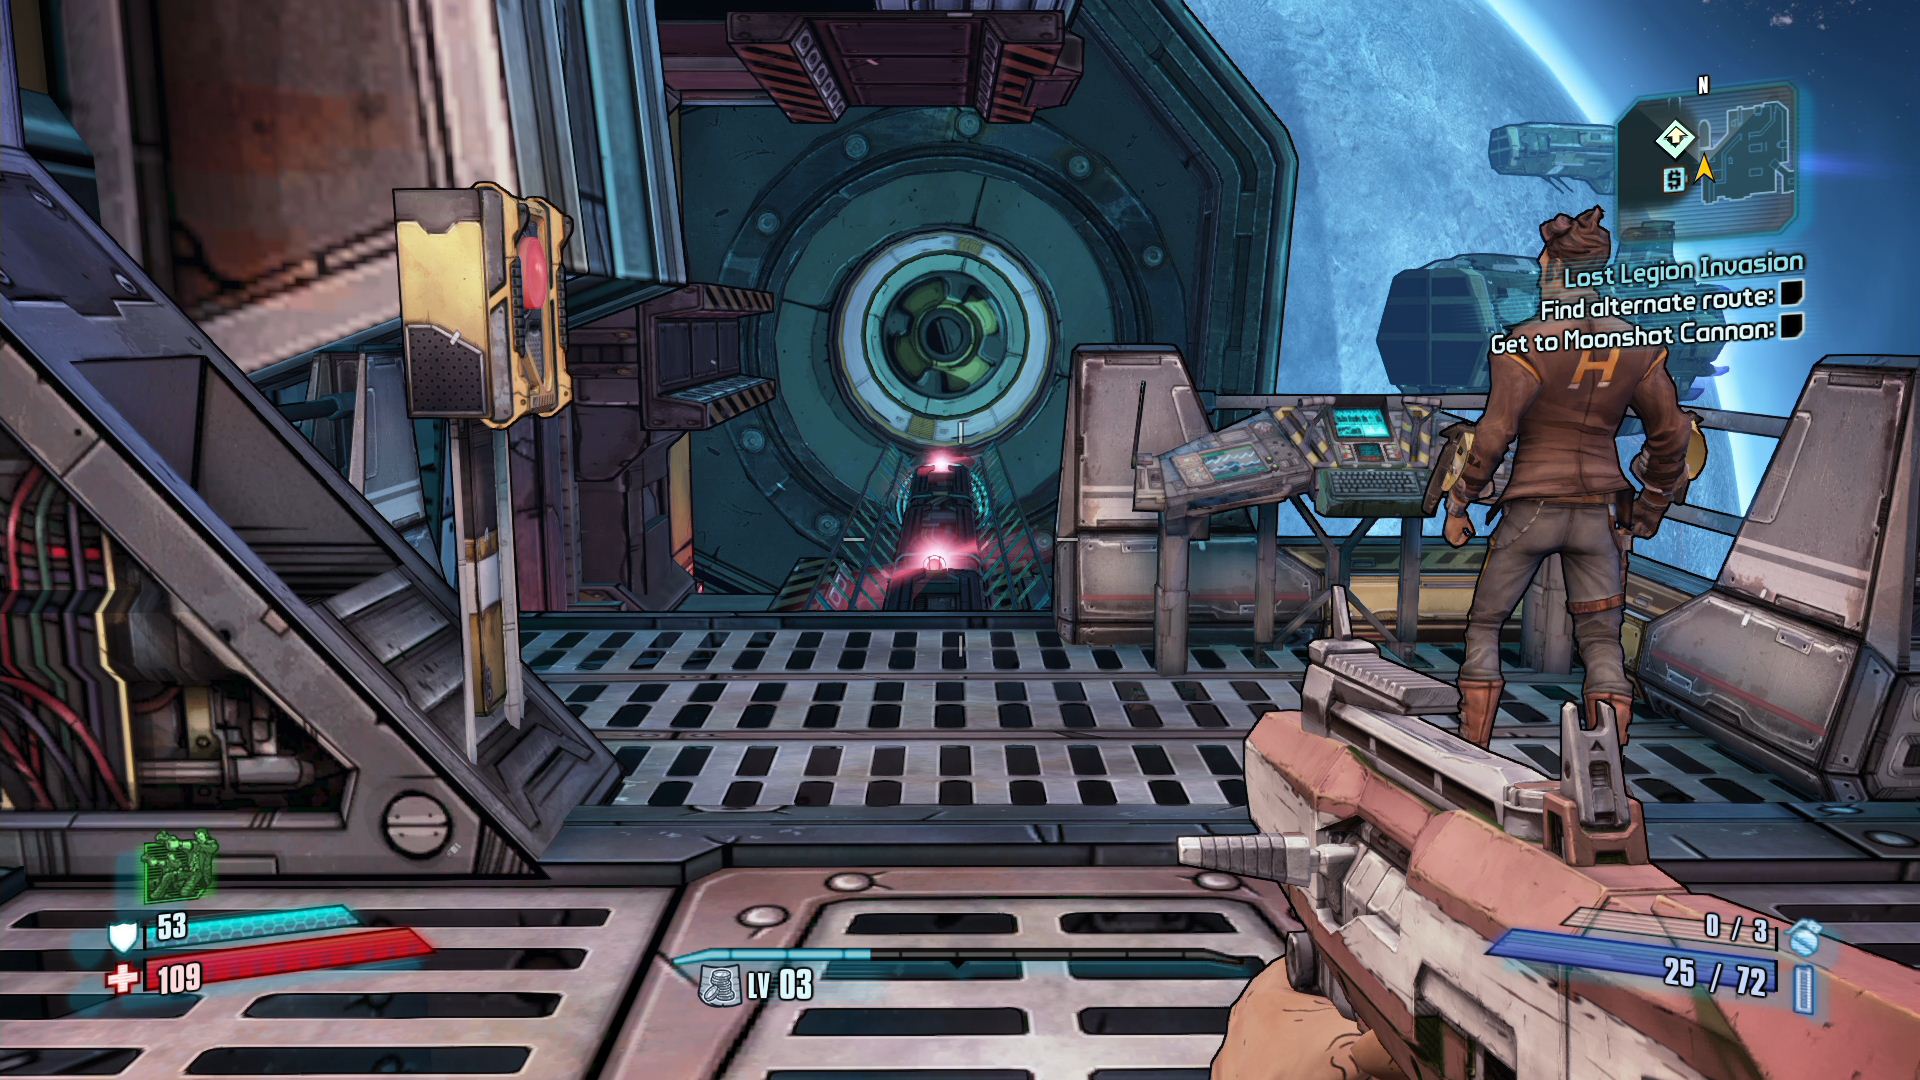 Borderlands and Borderlands: The Pre-Sequel Download And Play Xbox One This Weekend